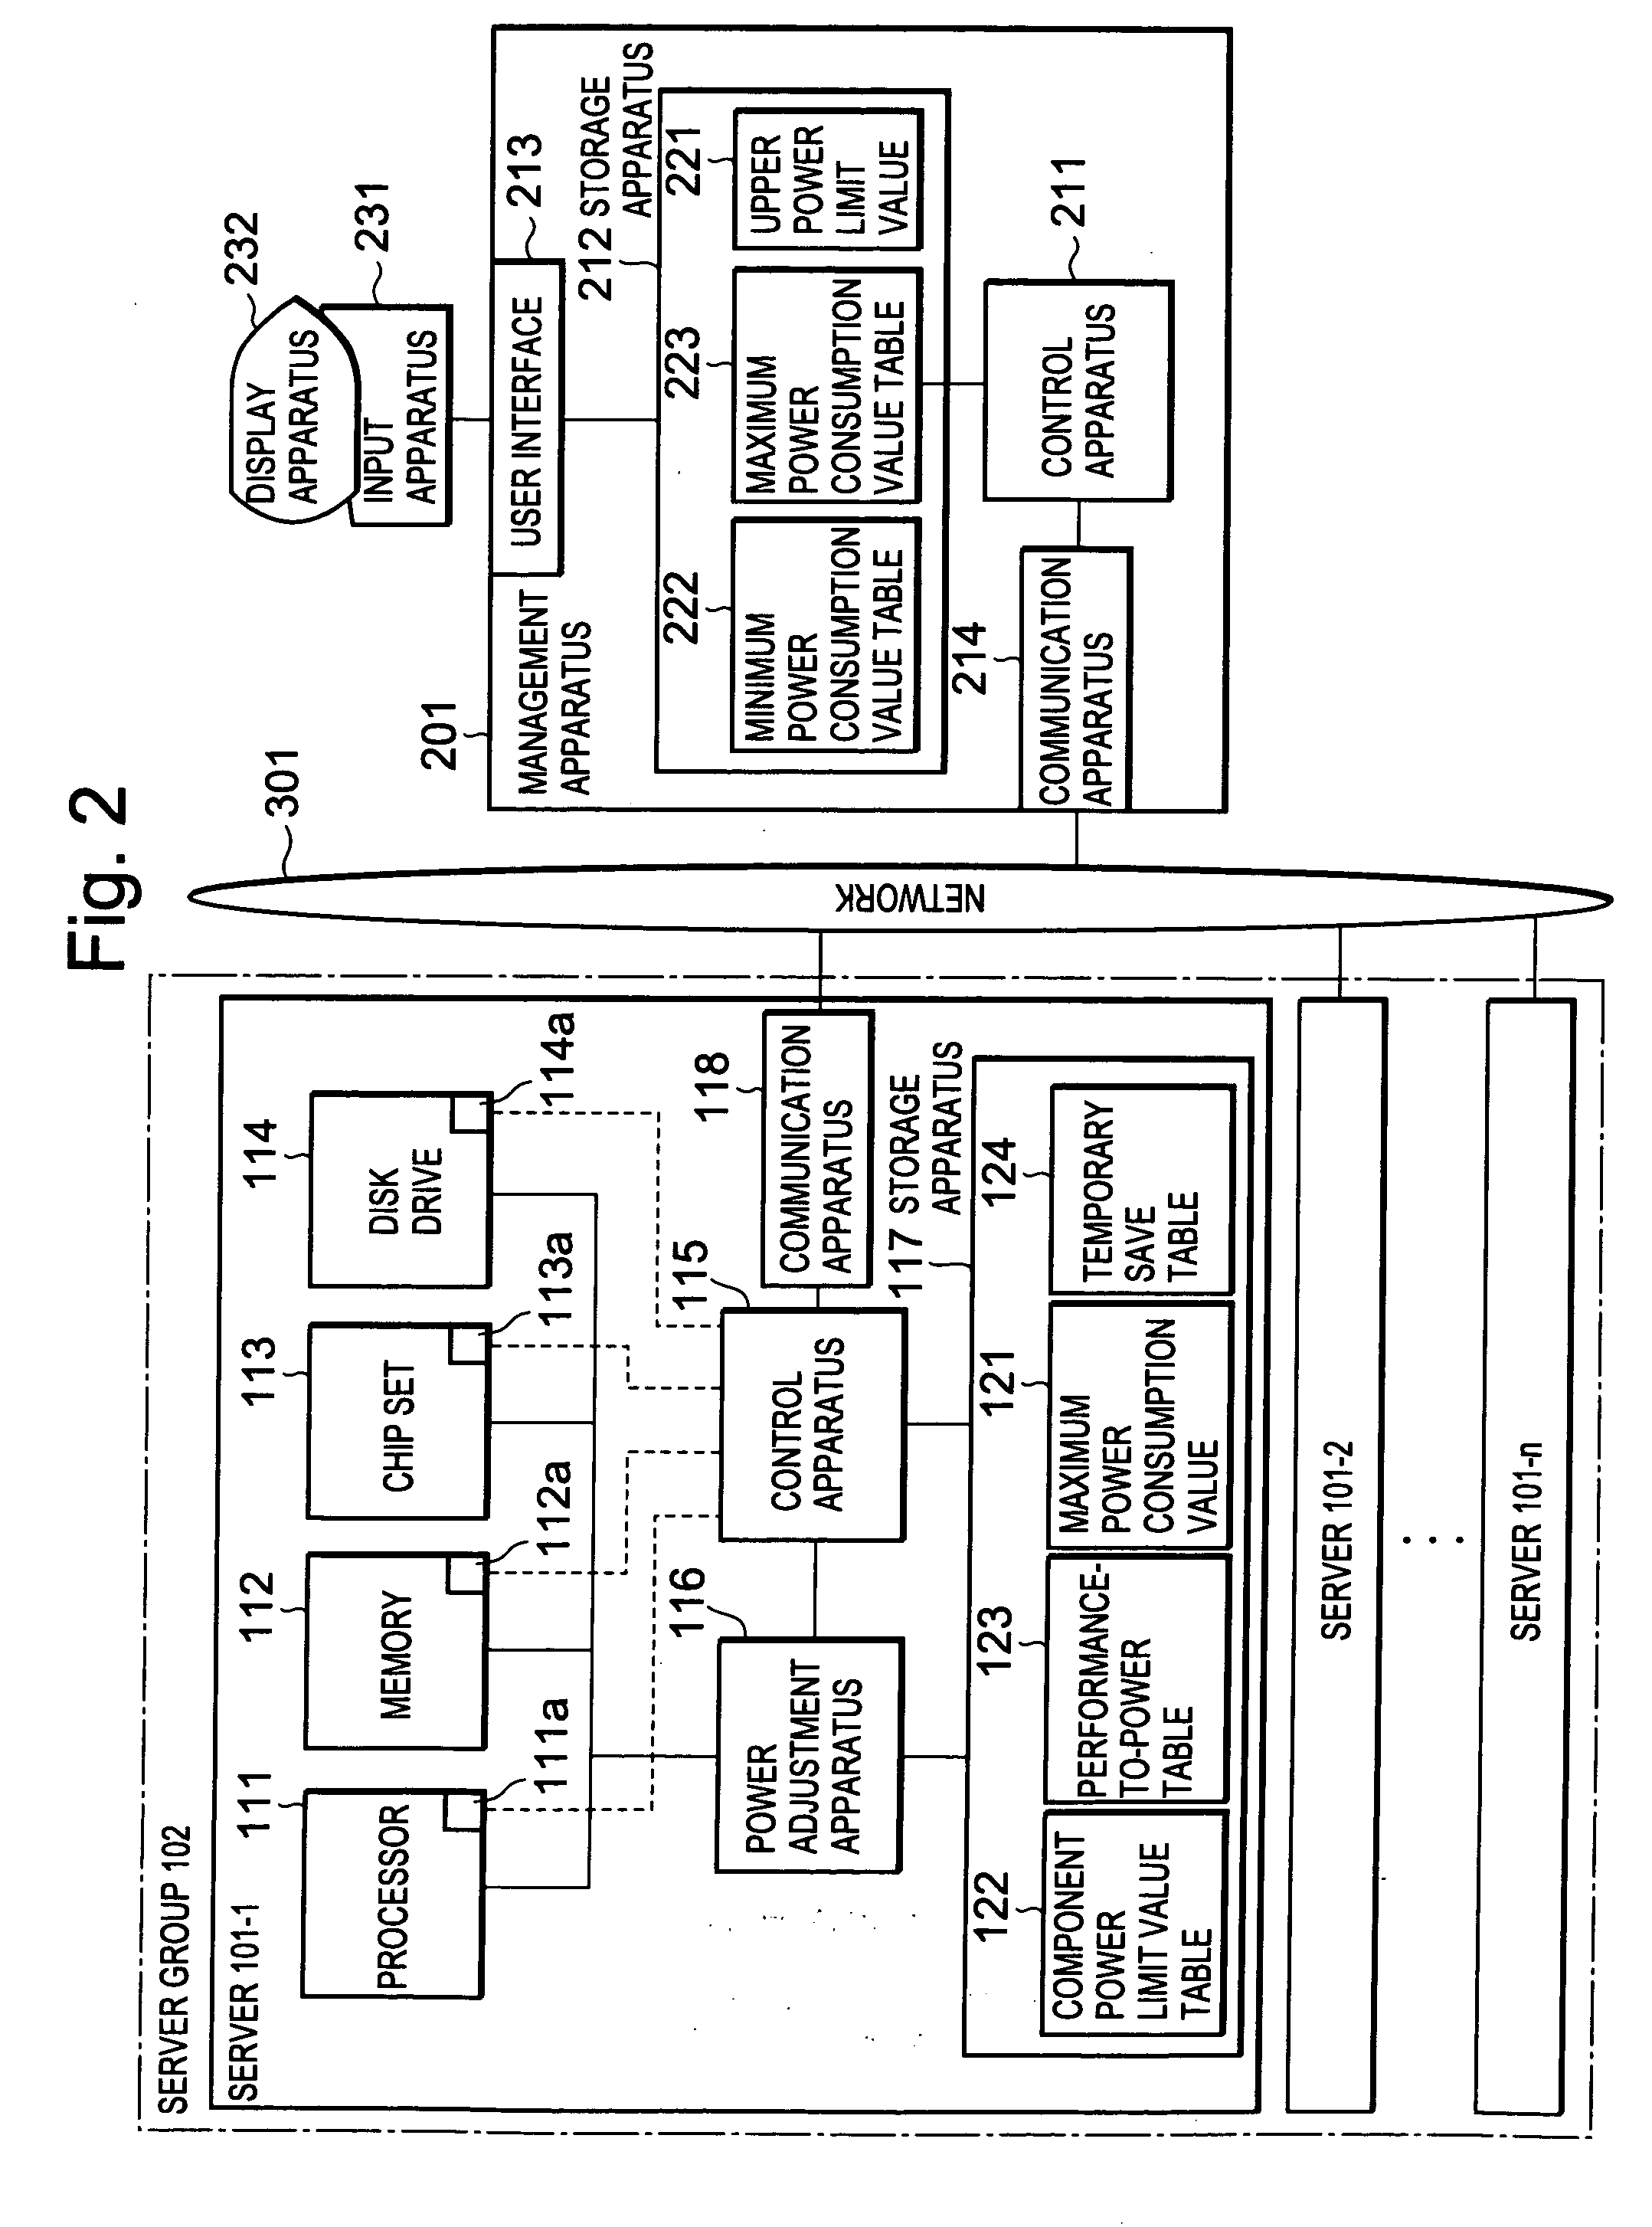 Apparatus, system and method for power management